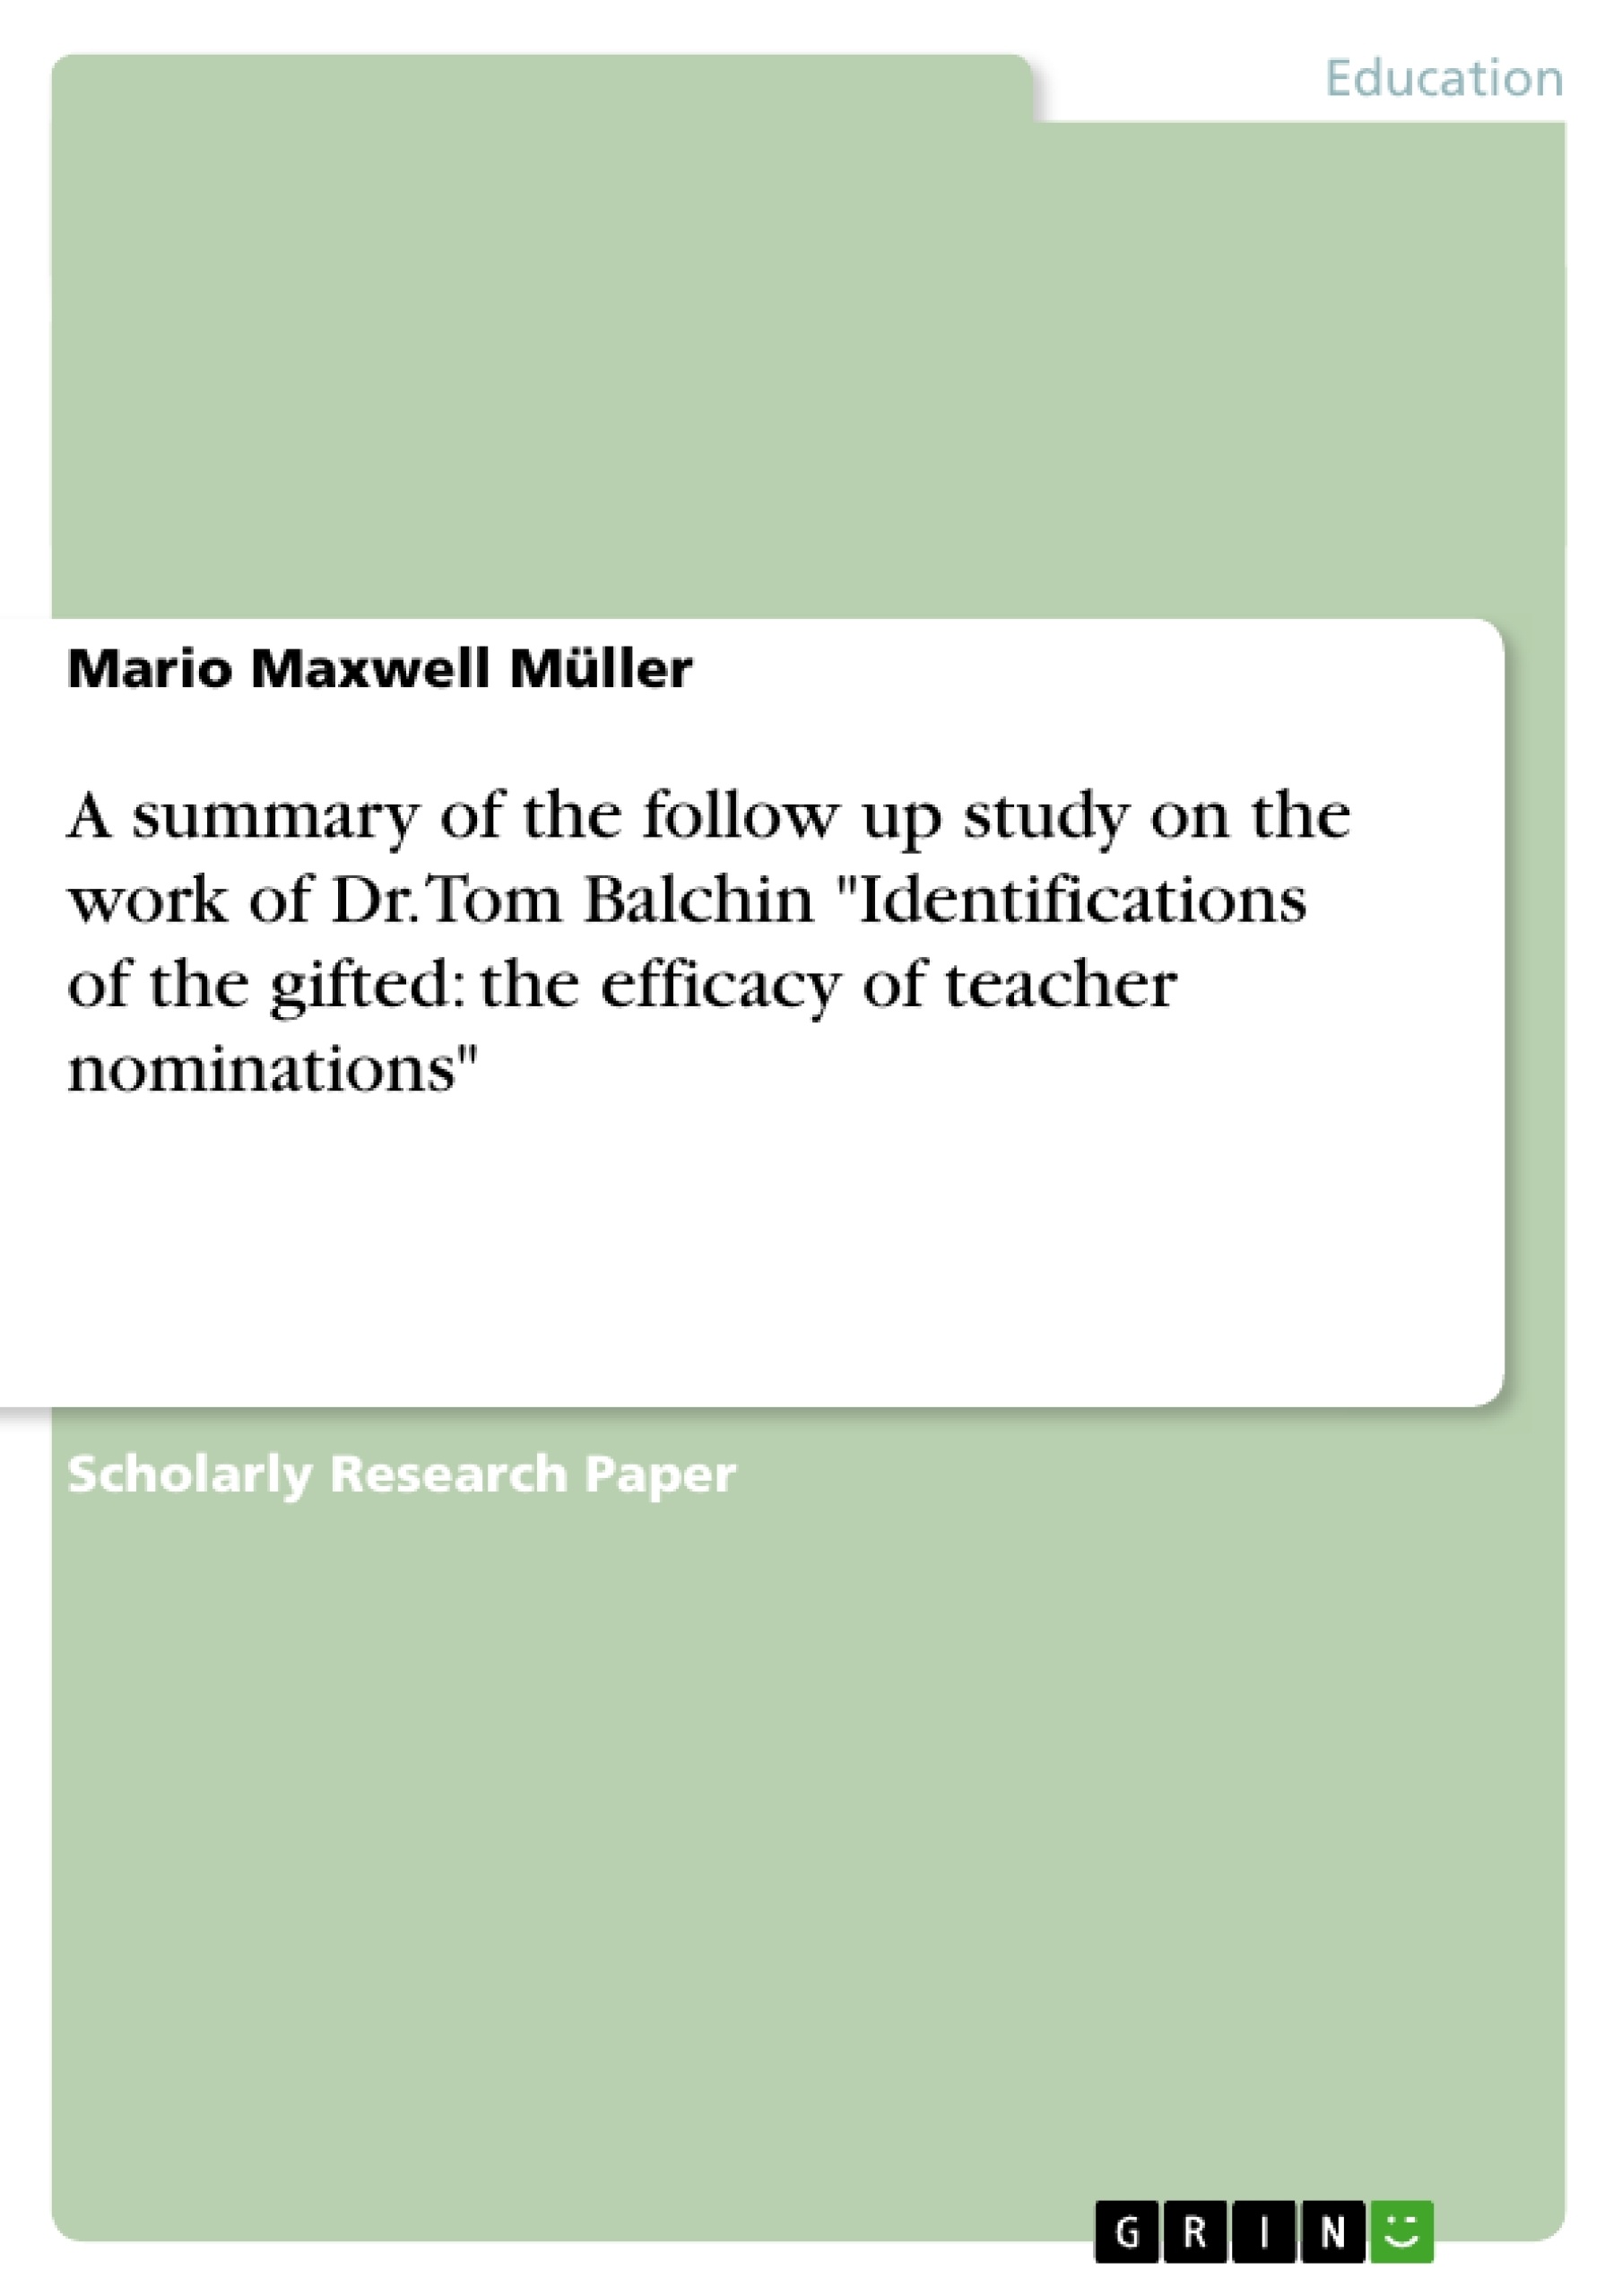 Titre: A summary of the follow up study on the work of Dr. Tom Balchin "Identifications of the gifted: the efficacy of teacher nominations"